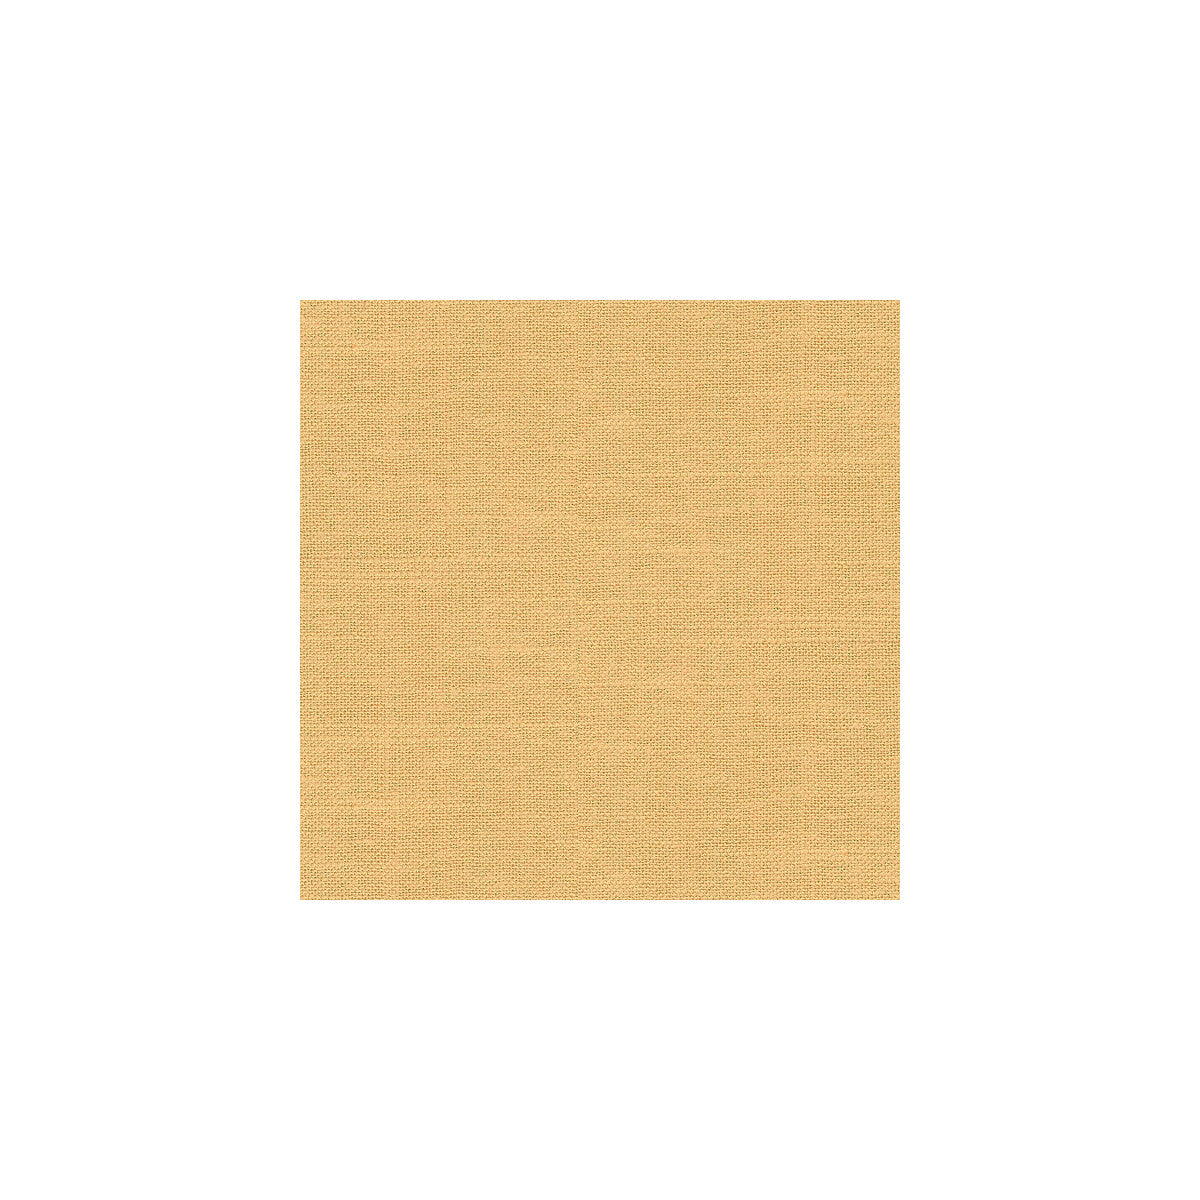 Barnegat fabric in camel color - pattern 24573.16.0 - by Kravet Basics in the Perfect Plains collection